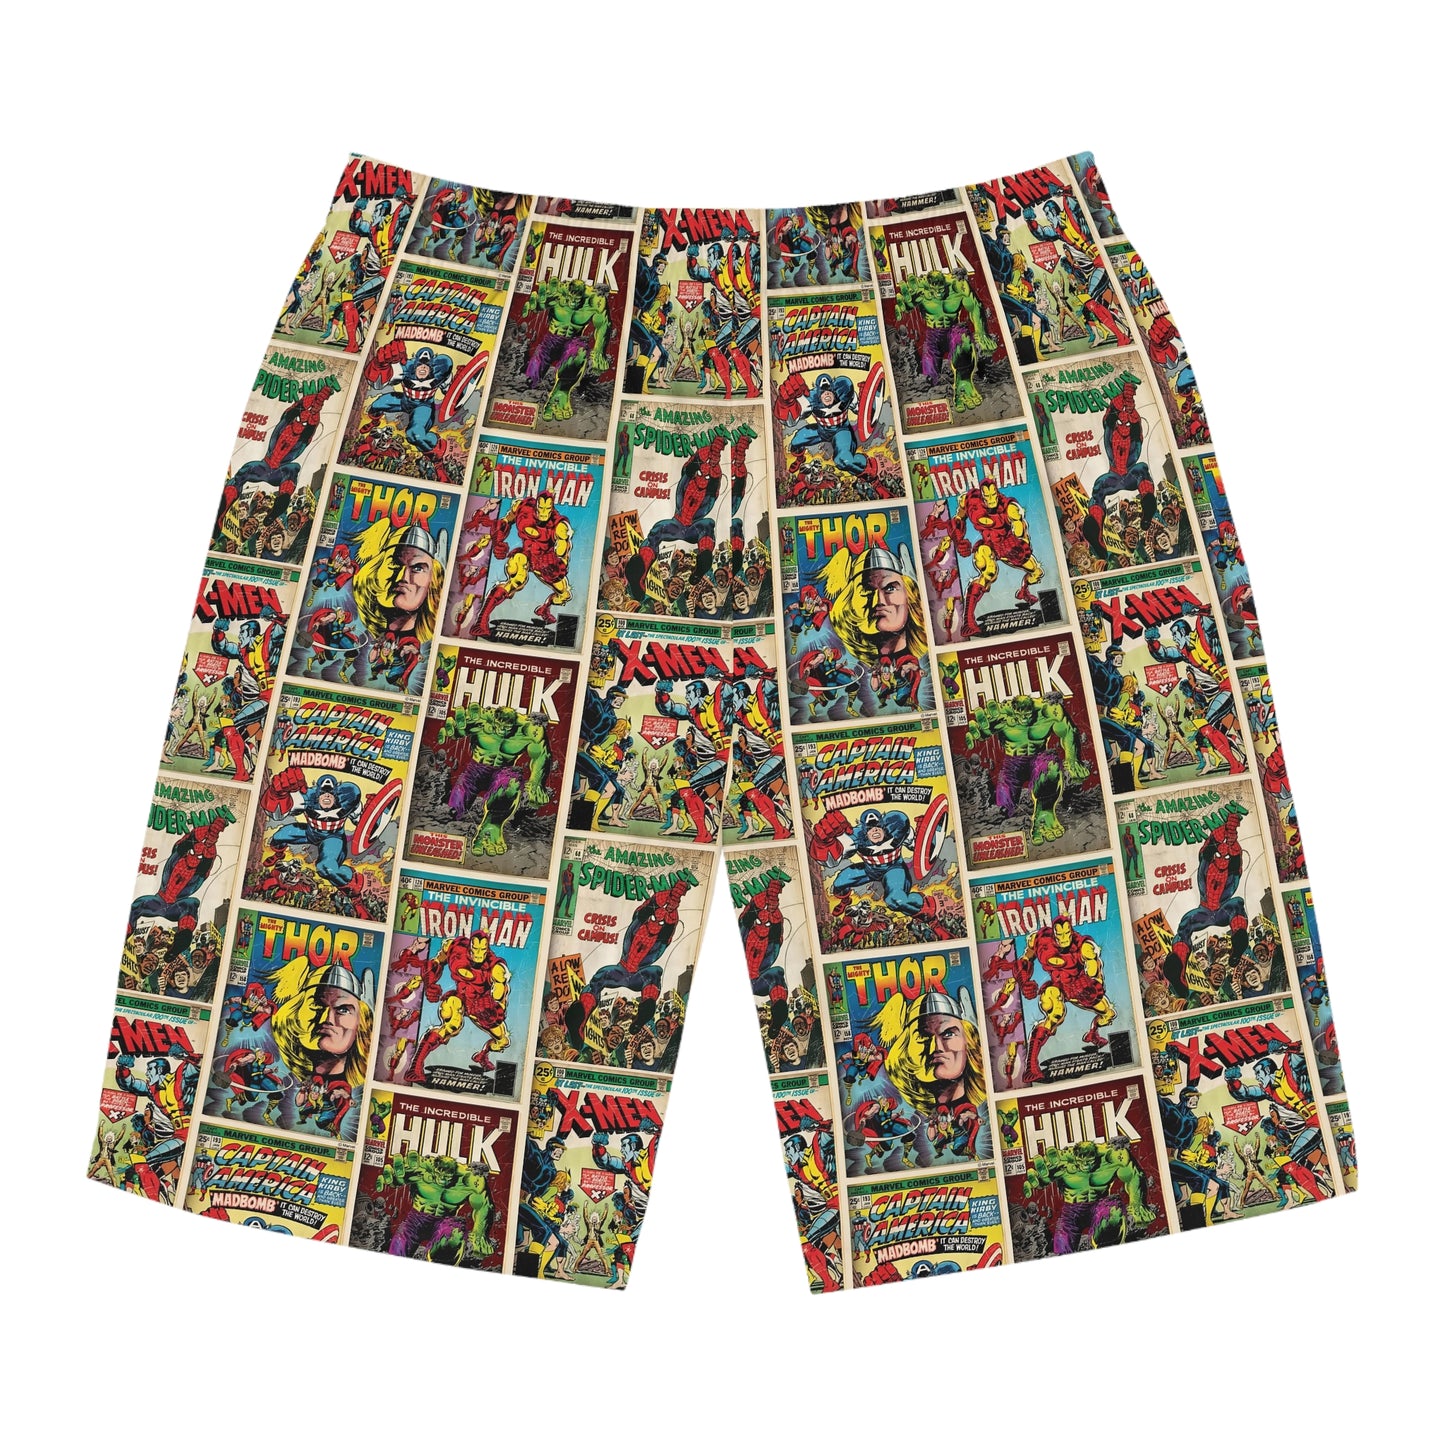 Marvel Comic Book Cover Collage Men's Board Shorts